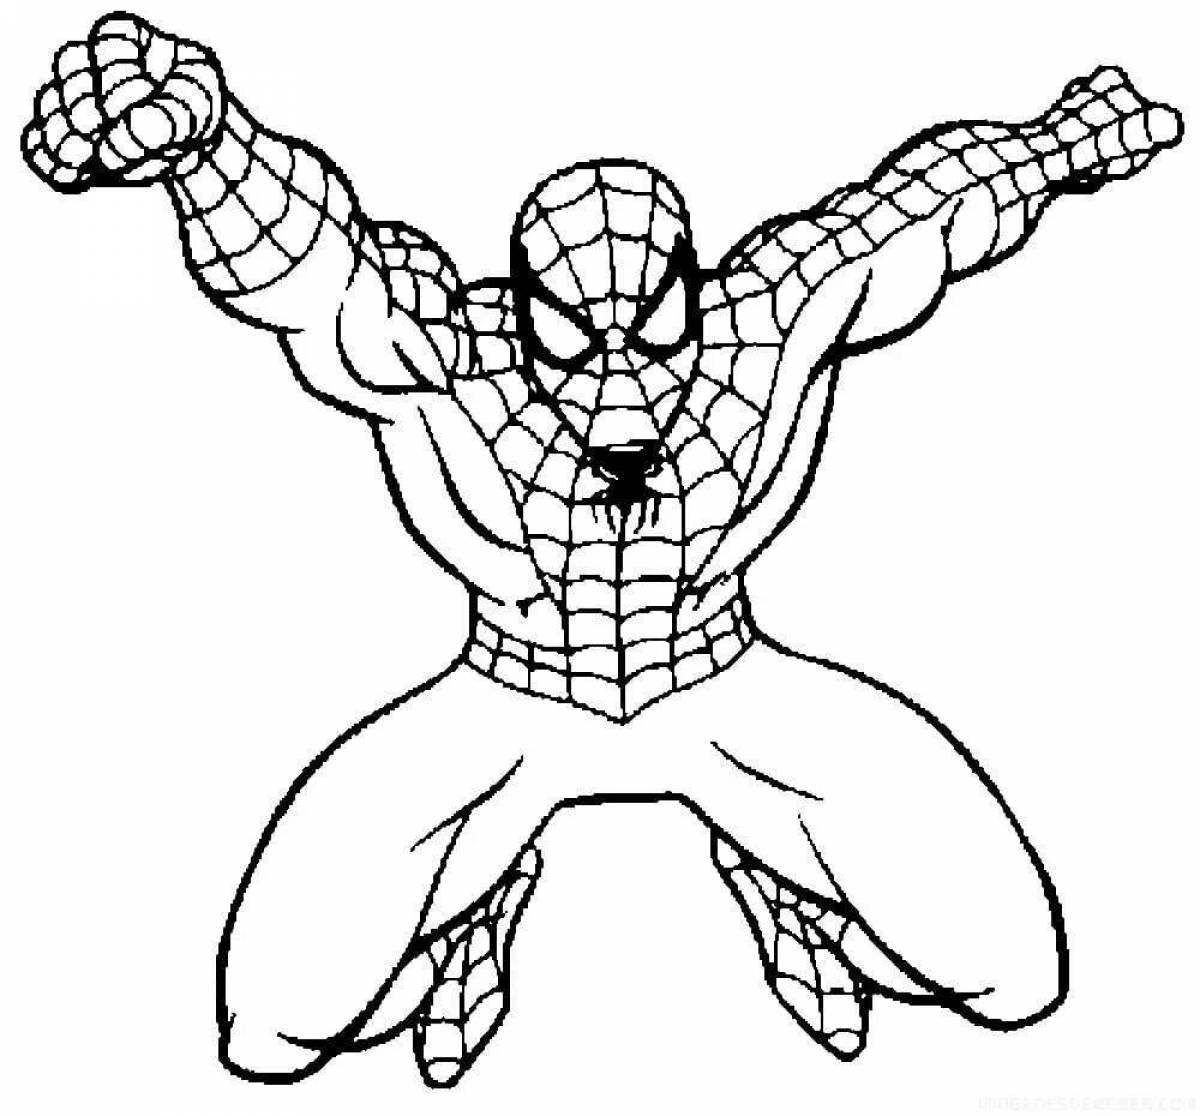 Spider-man funny coloring book for kids 5-6 years old